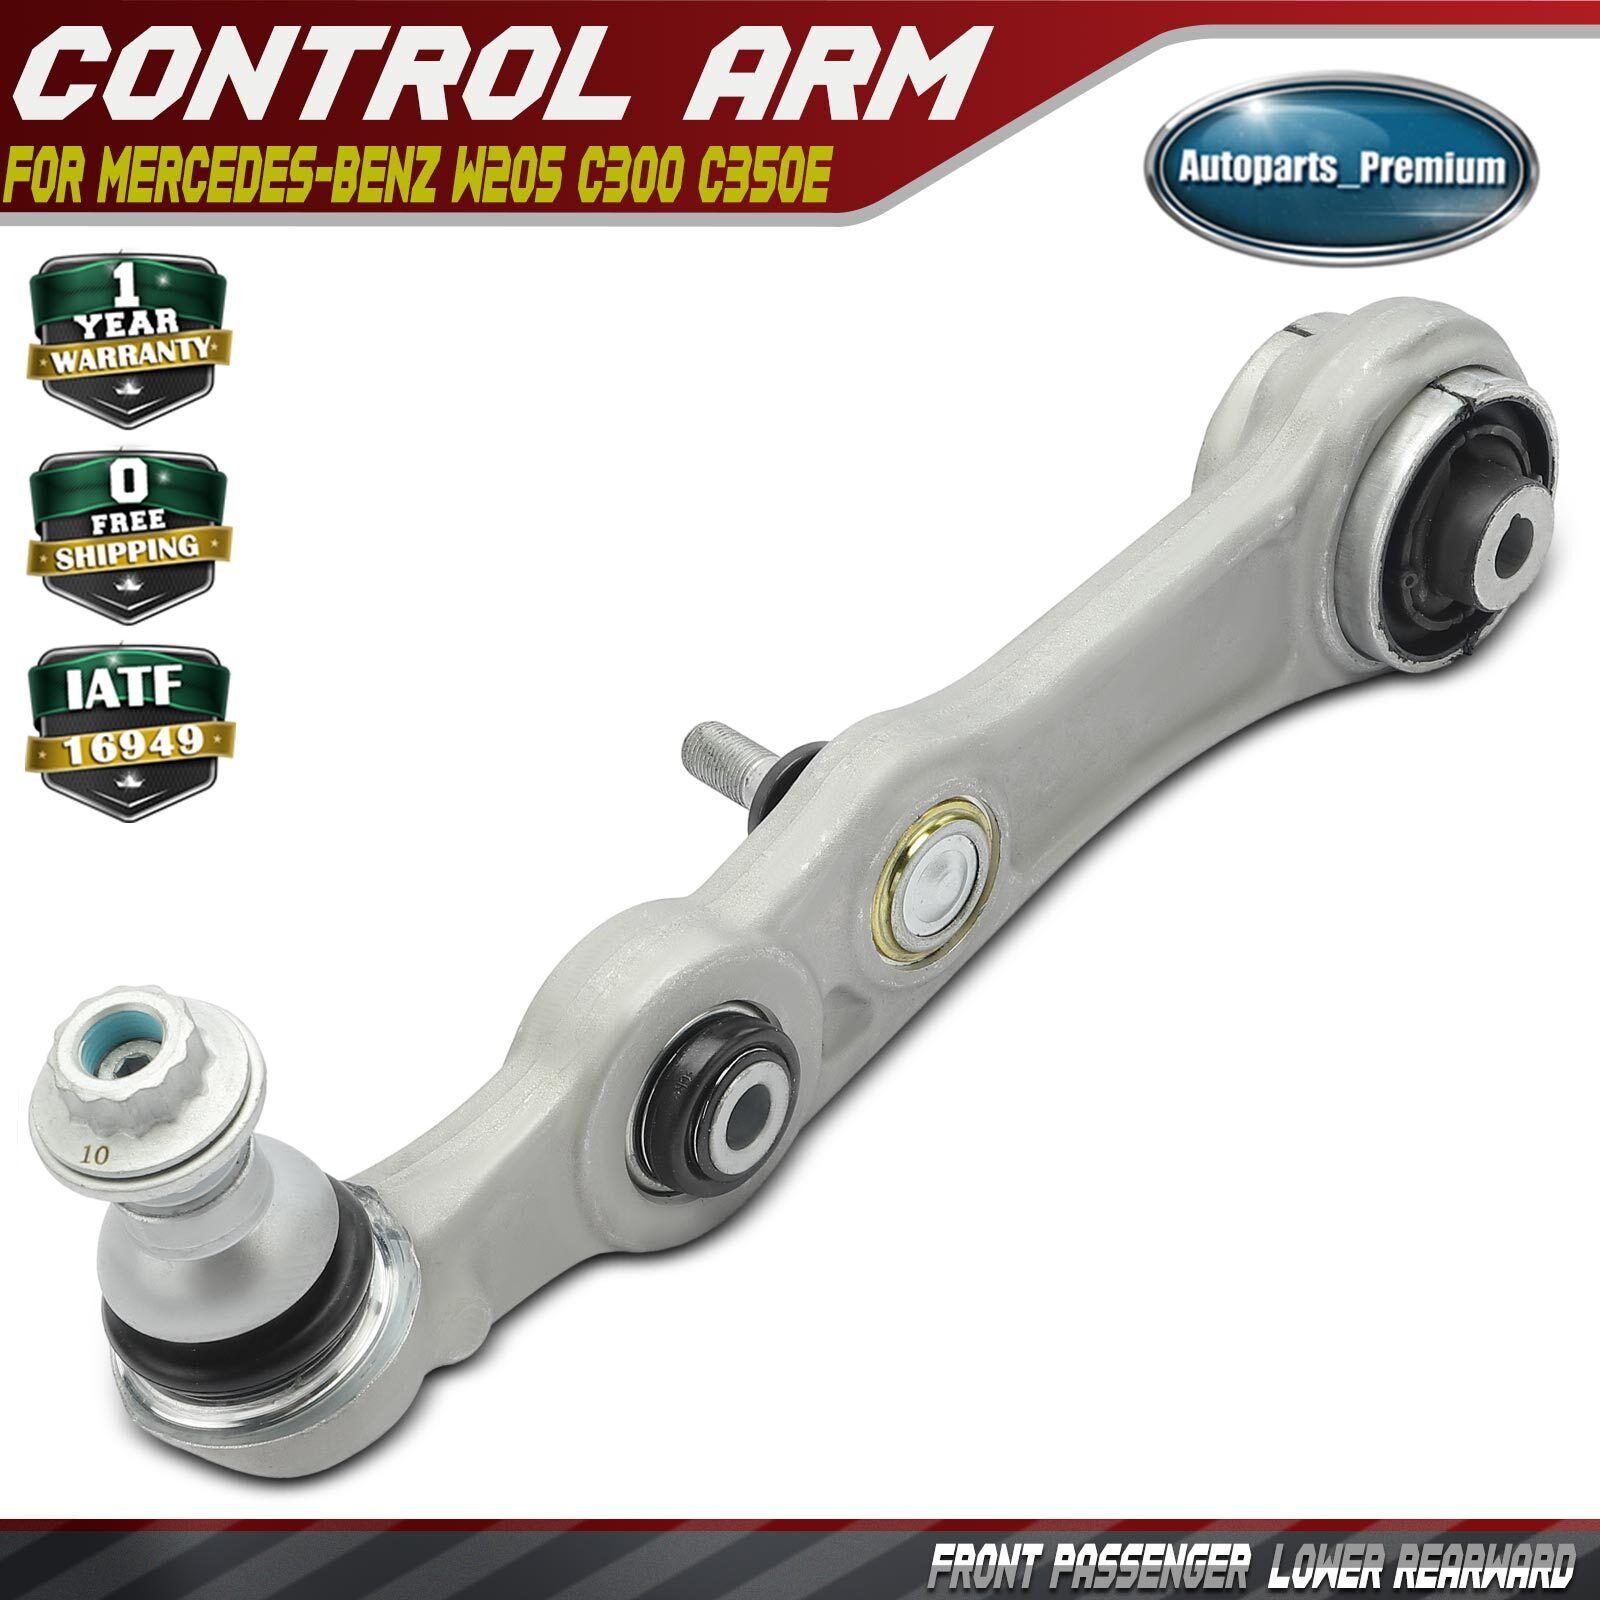 Front Right Lower Rearward Control Arm & Ball Joint for Mercedes-Benz C300 C350e